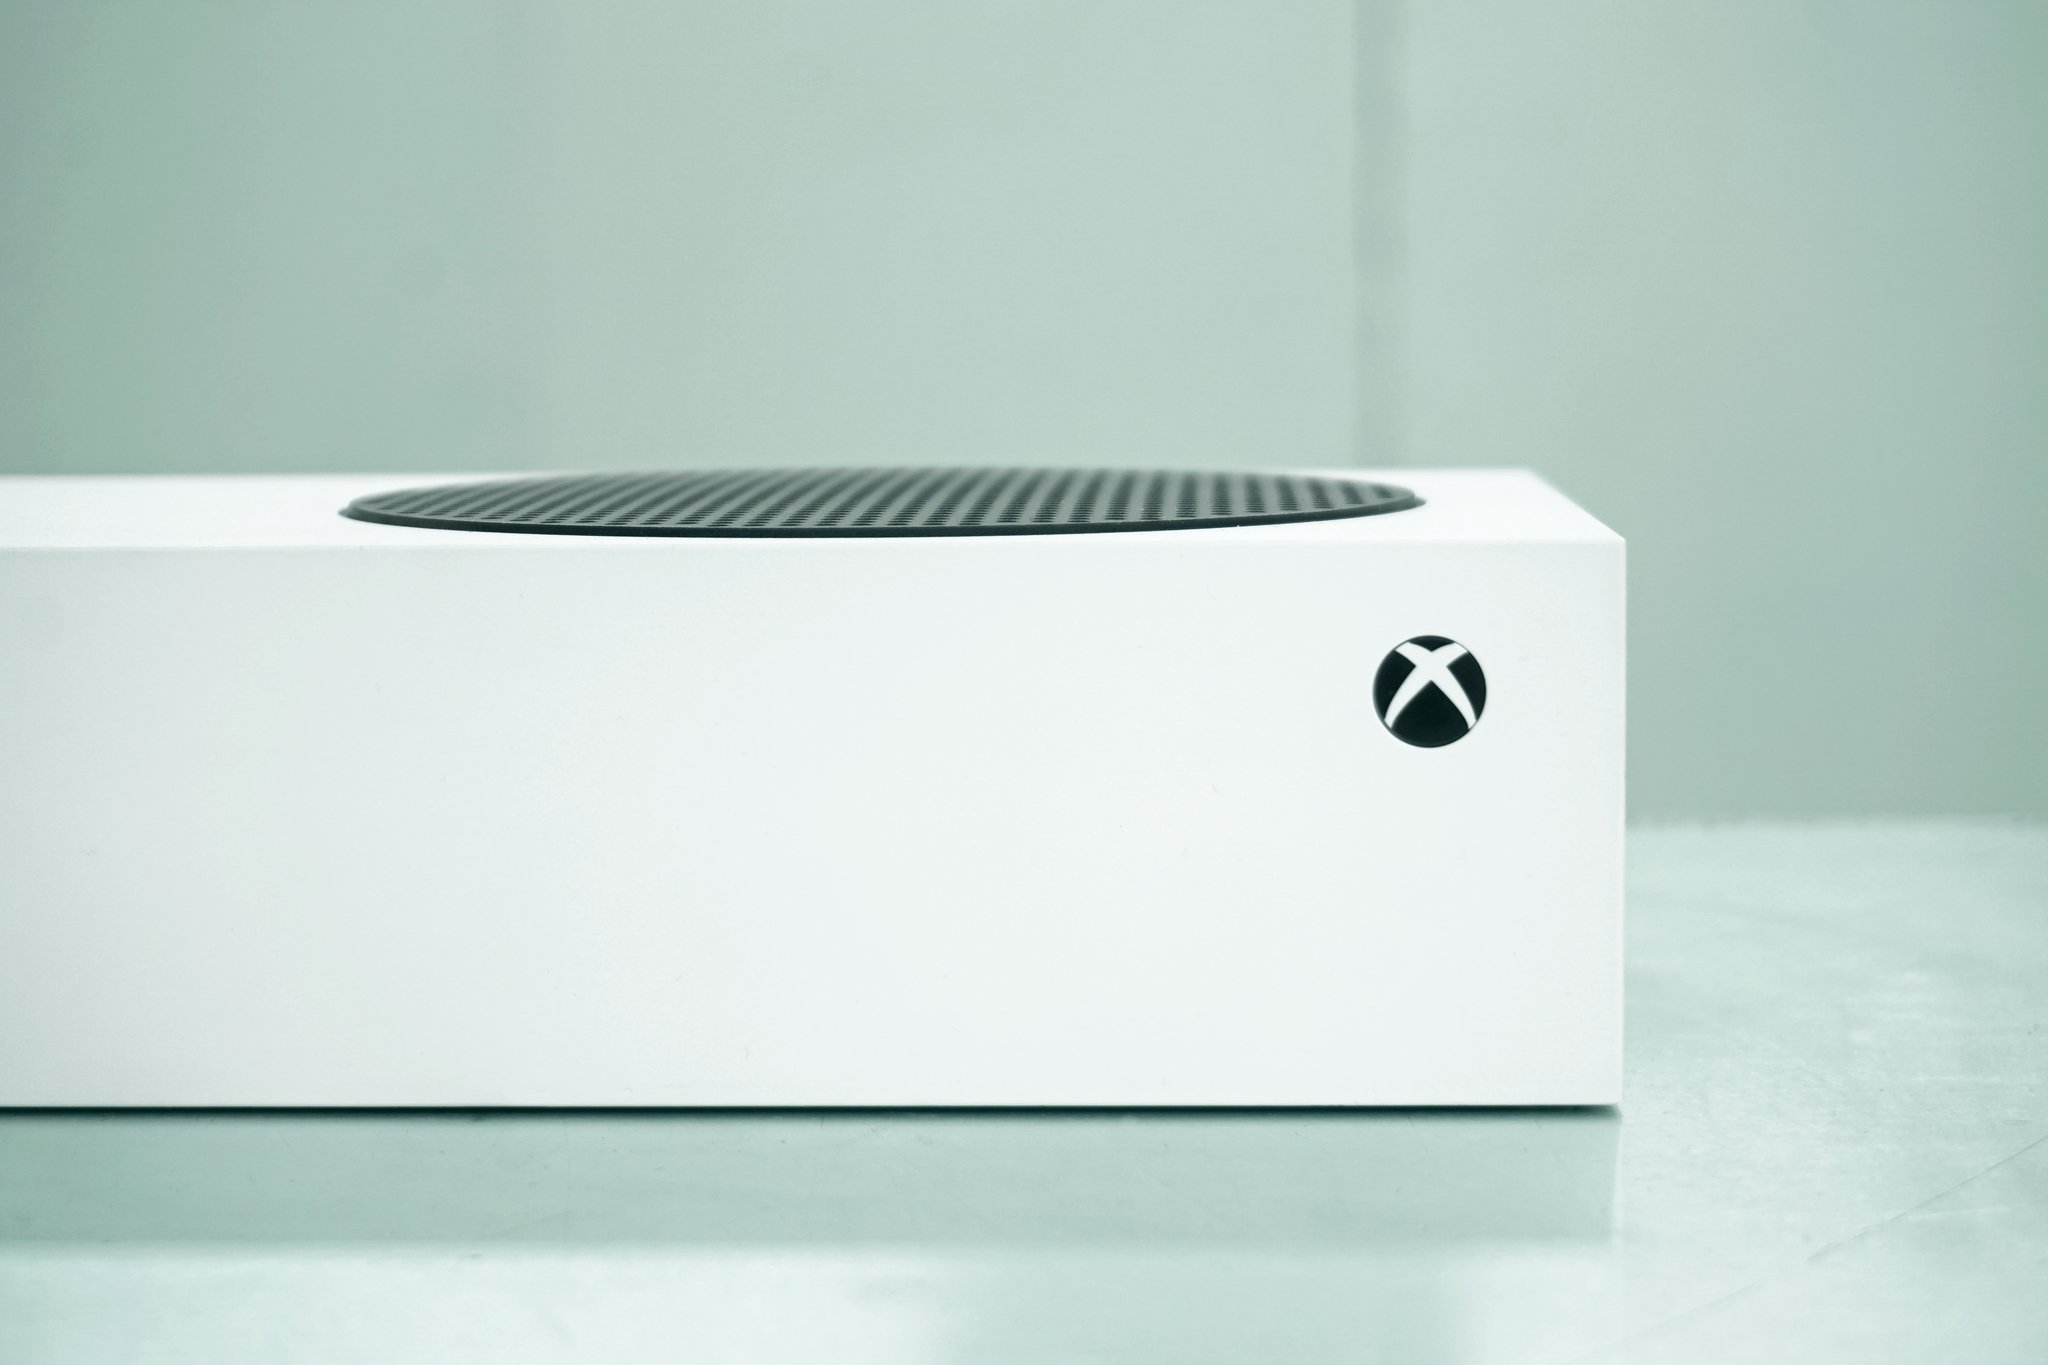 The cheaper Xbox Series S will support ray-tracing, 120fps and upscaled 4K